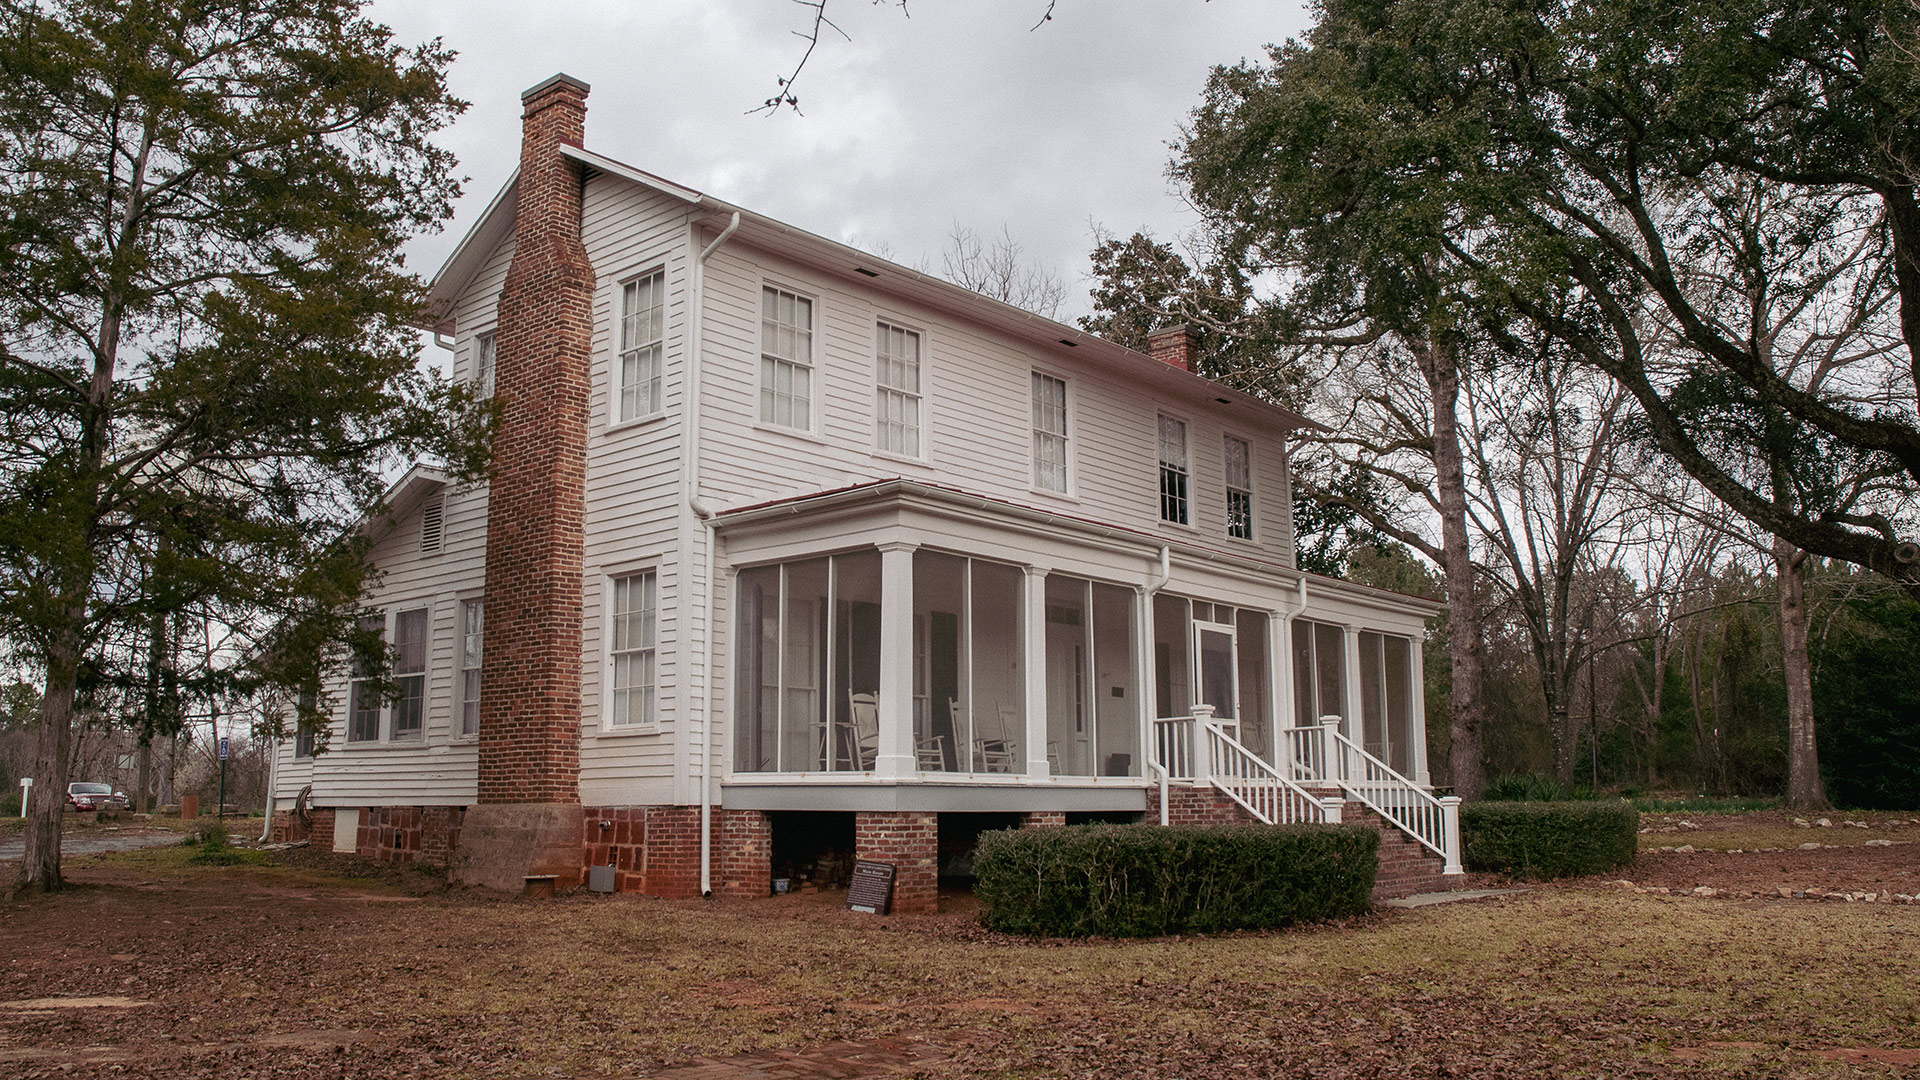 Flannery O'Connor's final home in Milledgeville, Georgia (photograph by Stacy Reece)